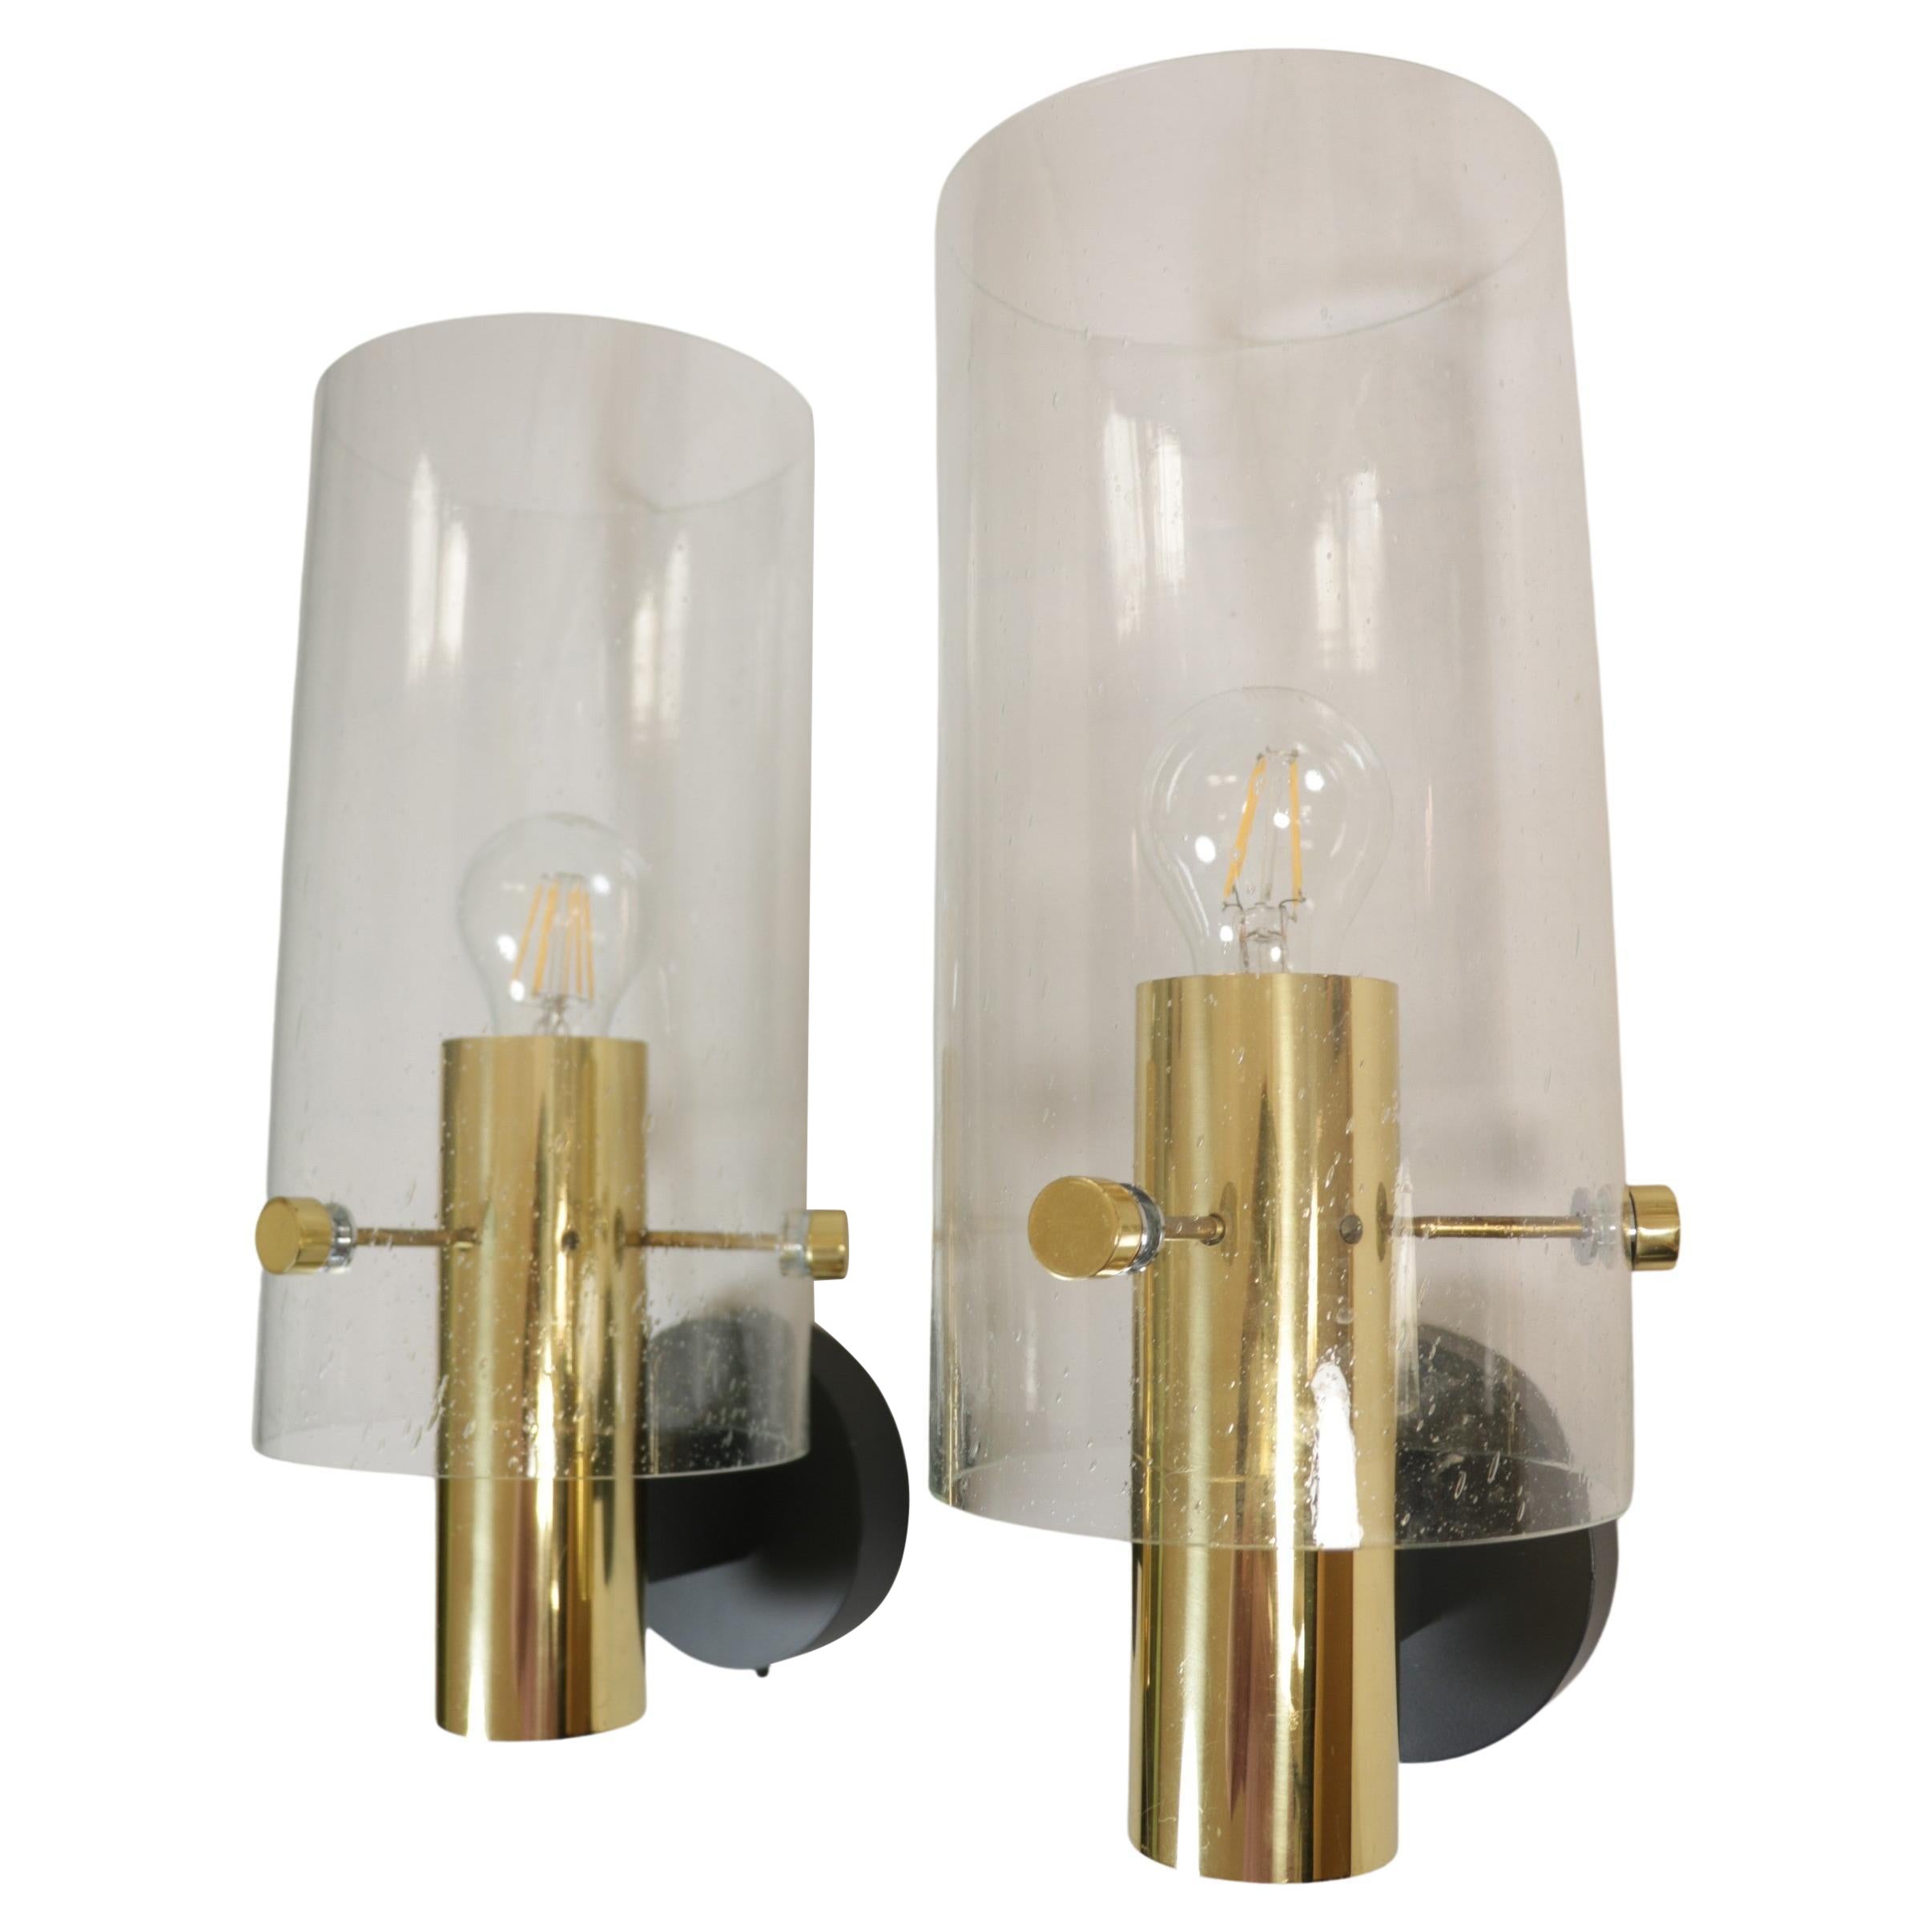 Set of Two Limburg Glass and Brass Wall Sconces, Wall Lights, 1970s